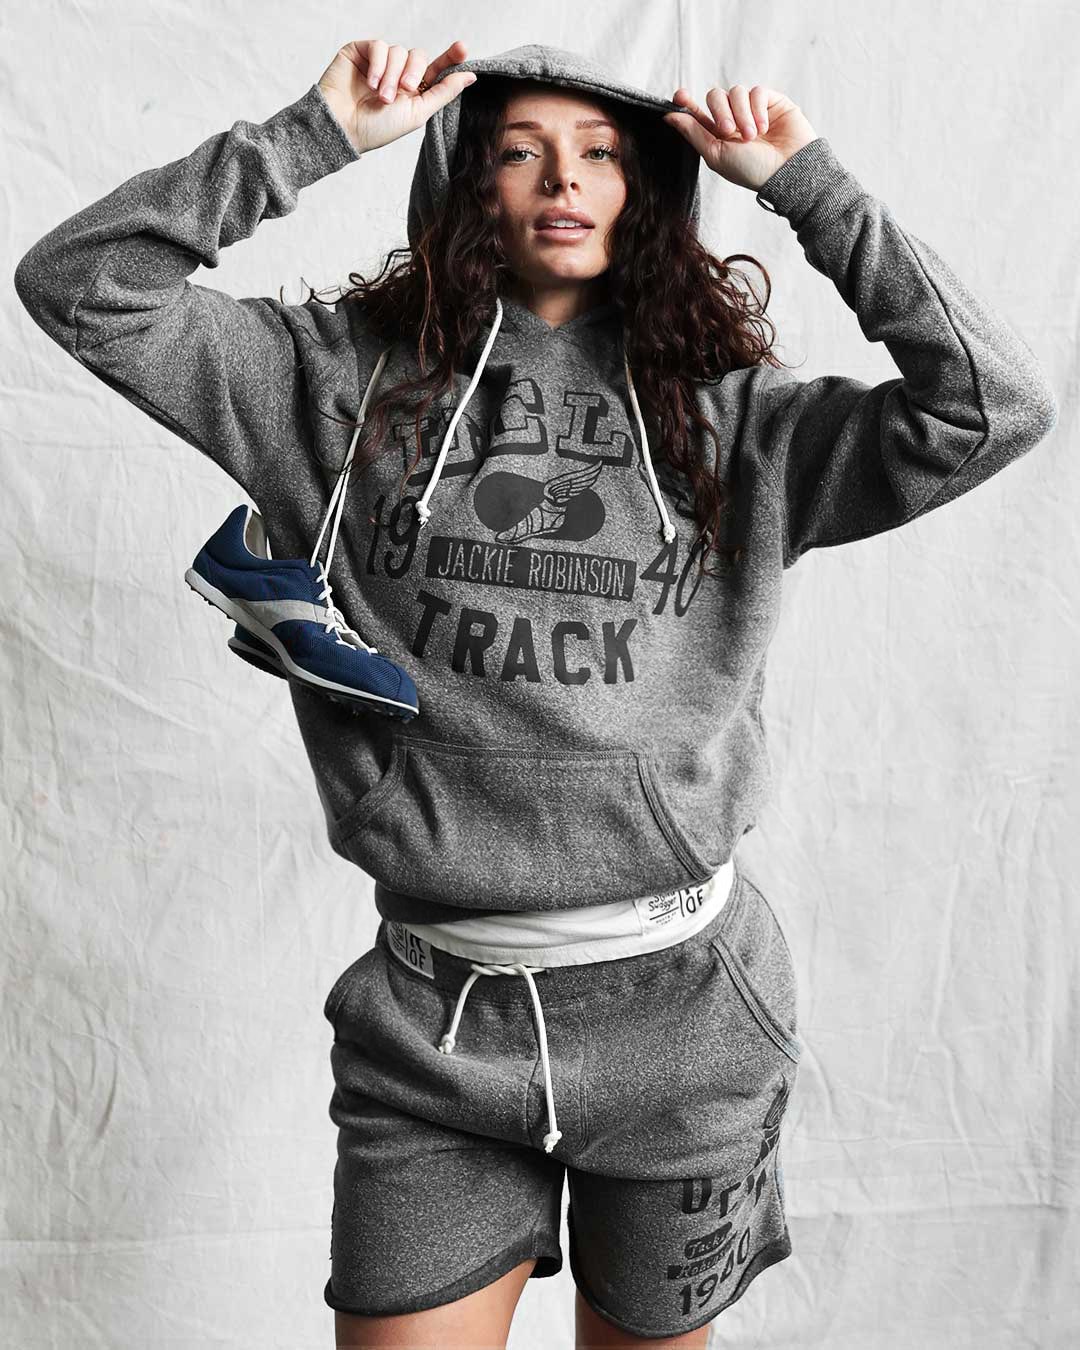 UCLA - Jackie Robinson Track Grey PO Hoody - Roots of Fight